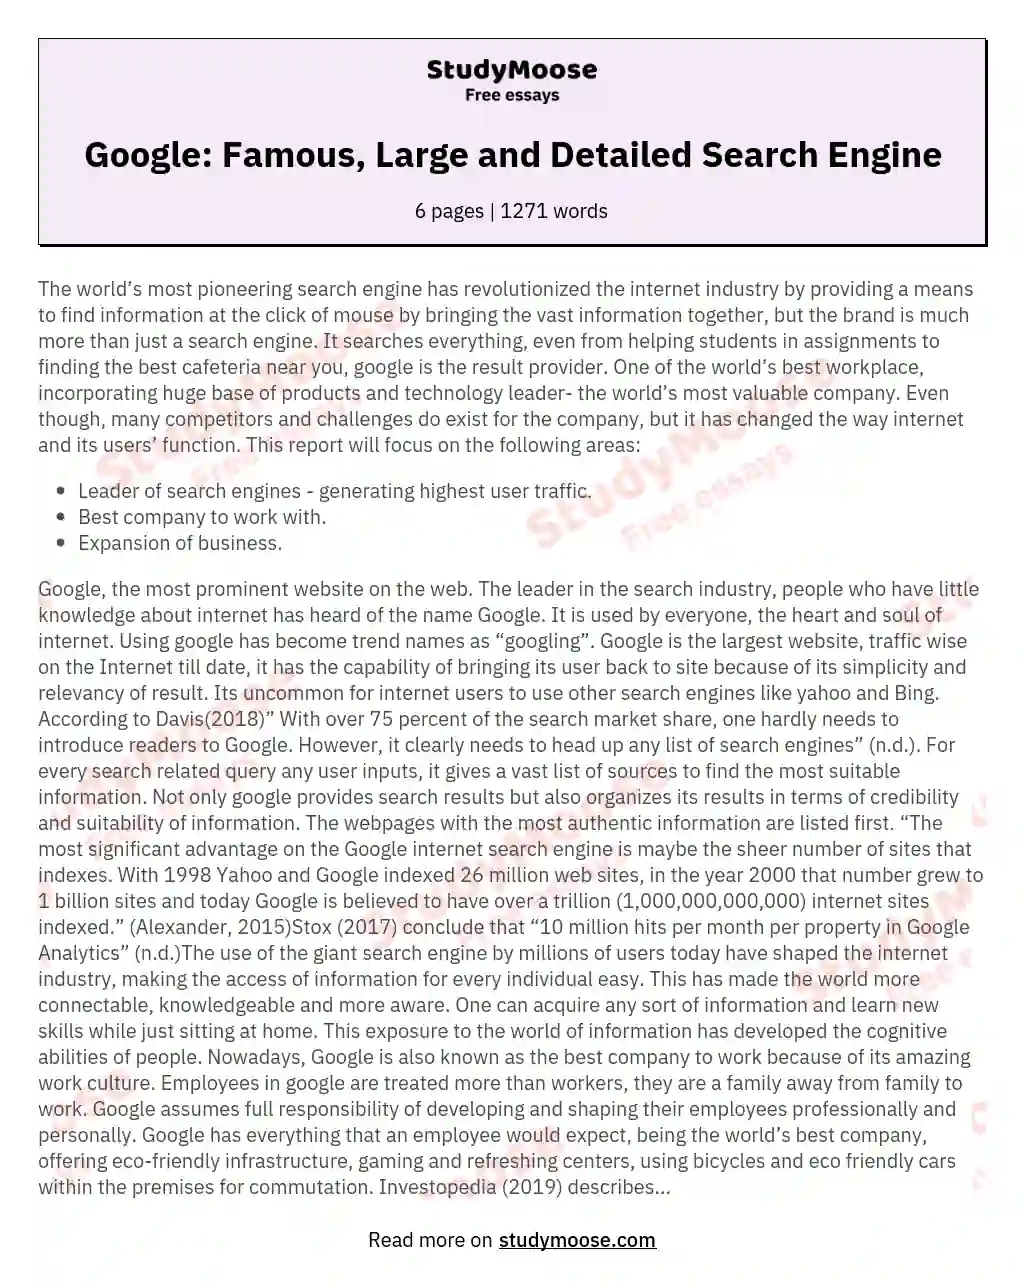 Google: Famous, Large and Detailed Search Engine essay